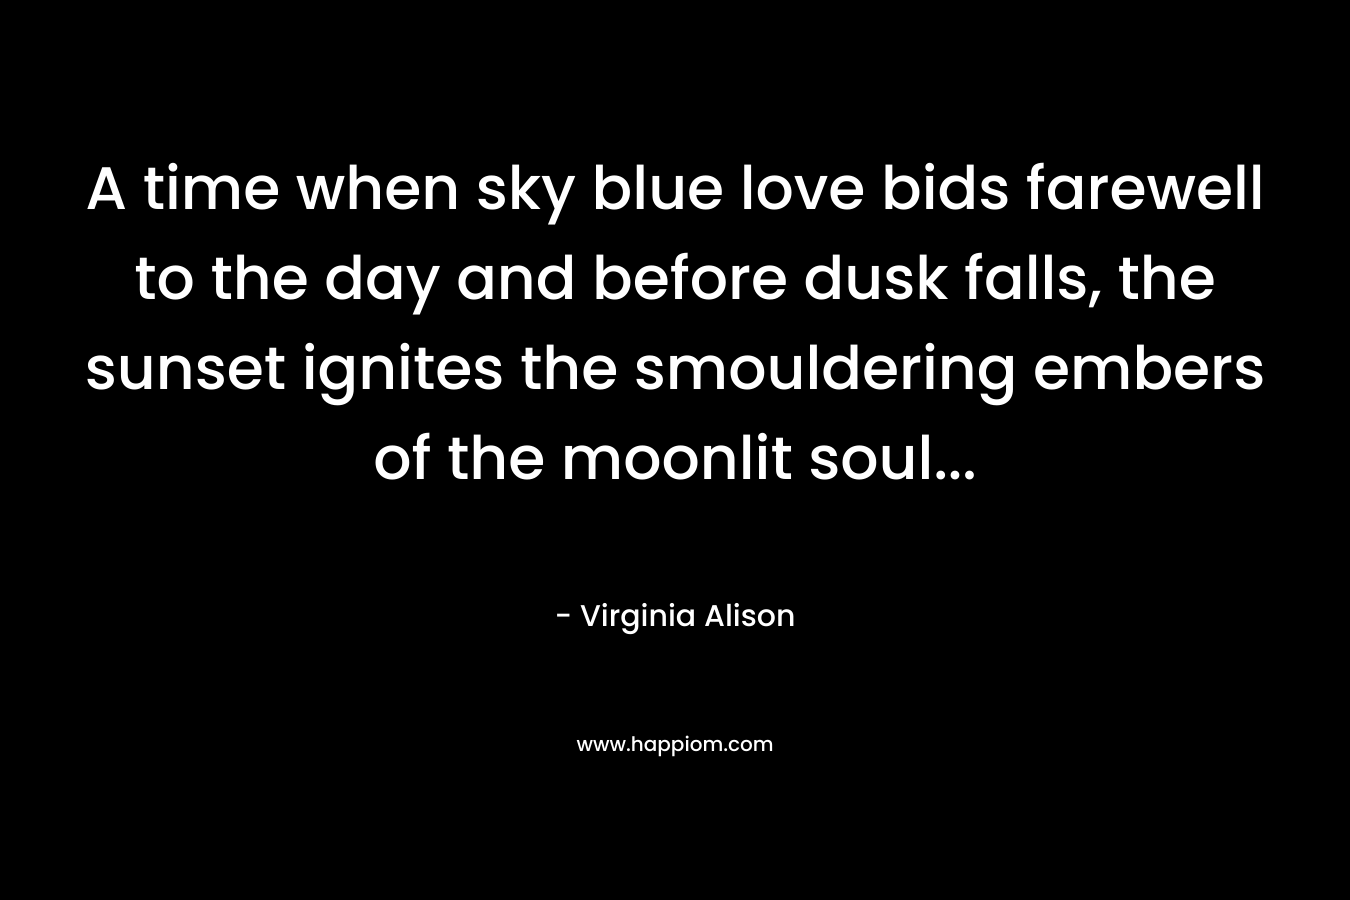 A time when sky blue love bids farewell to the day and before dusk falls, the sunset ignites the smouldering embers of the moonlit soul… – Virginia Alison